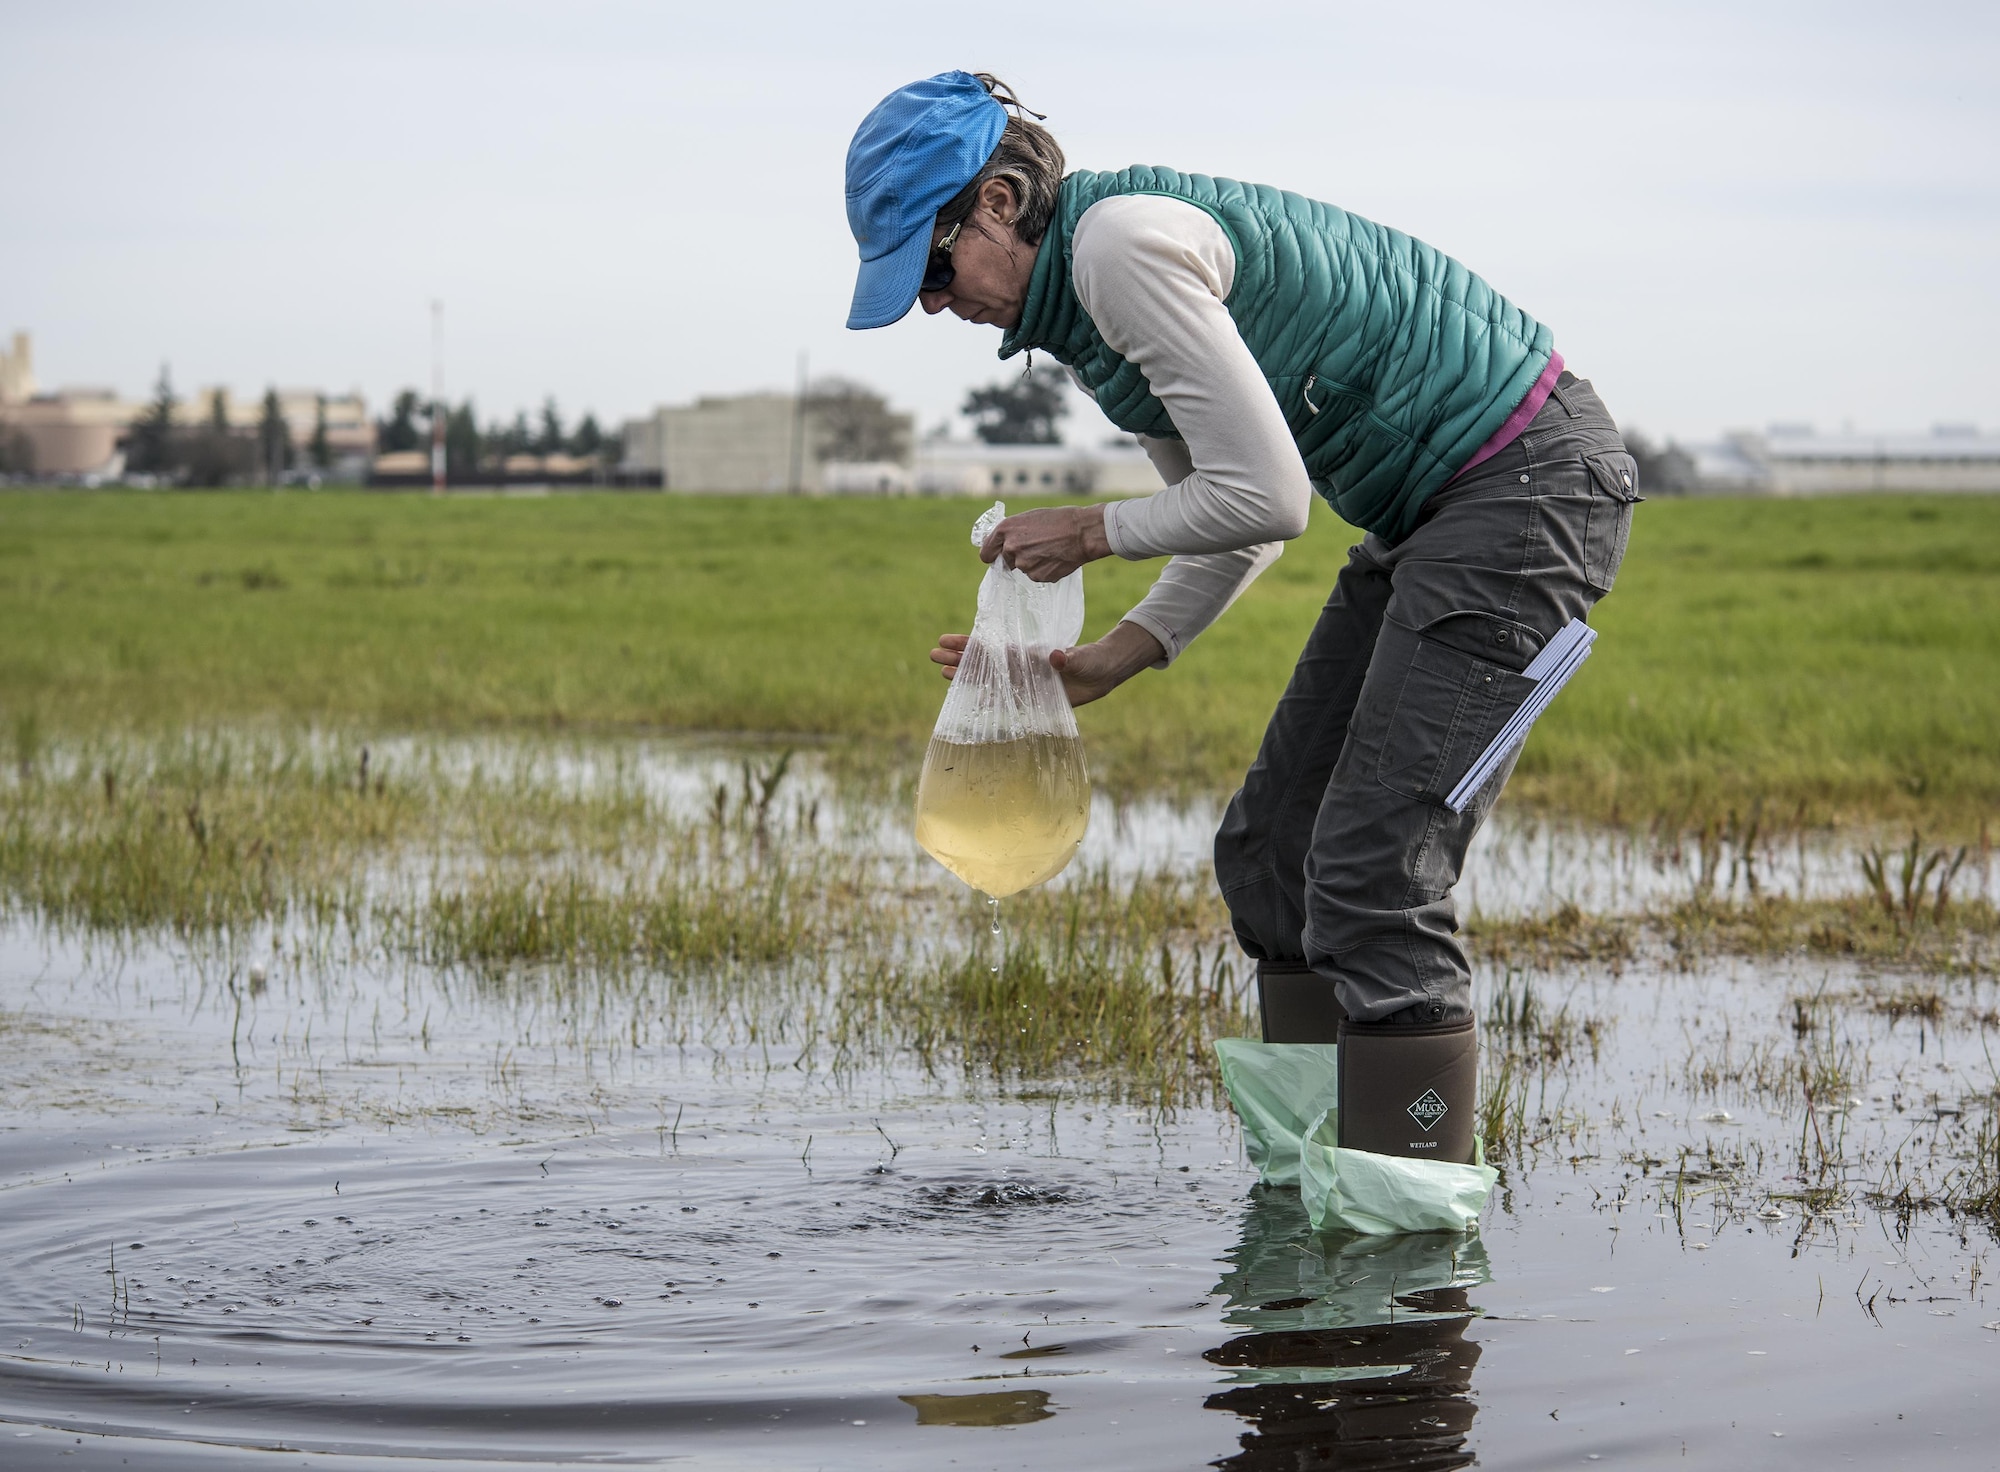 Dr. Alisa Wade, University of Montana, collects a sample from a vernal pond Feb 13, 2017 at Travis Air Force Base, Calif.  Wade, part of a two person team, is the project coordinator for a “habitat quality assessment” project to determine if Travis has a viable environment for the western spadefoot toad. The assessment includes recording data for vegetation type, soil friability and a visual check for mammal burrows and WST predators. The team will also collect DNA samples from several ephemeral vernal pools through a filter that will go back to a genetics lab to determine if any DNA from the WST is floating around the pool, indicating the toads have been there. (U.S. Air Force photo/ Heide Couch)